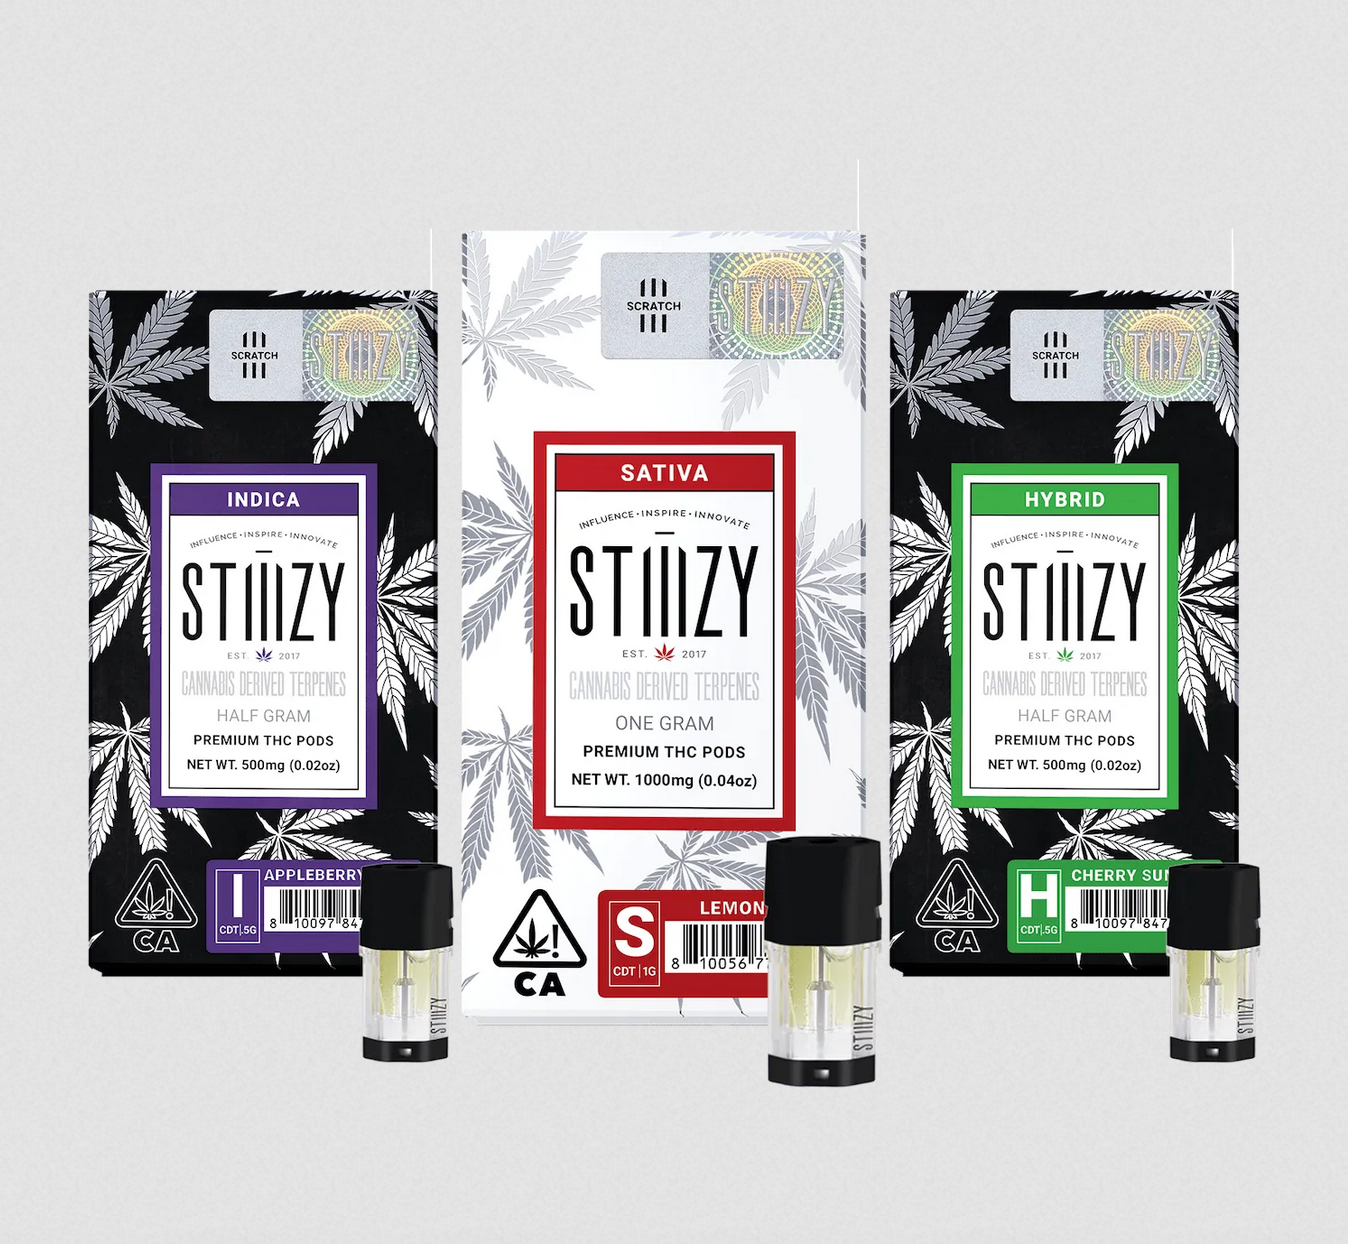 Three weed vape pods with cannabis-derived terpenes stand in front of their STIIIZY packaging.